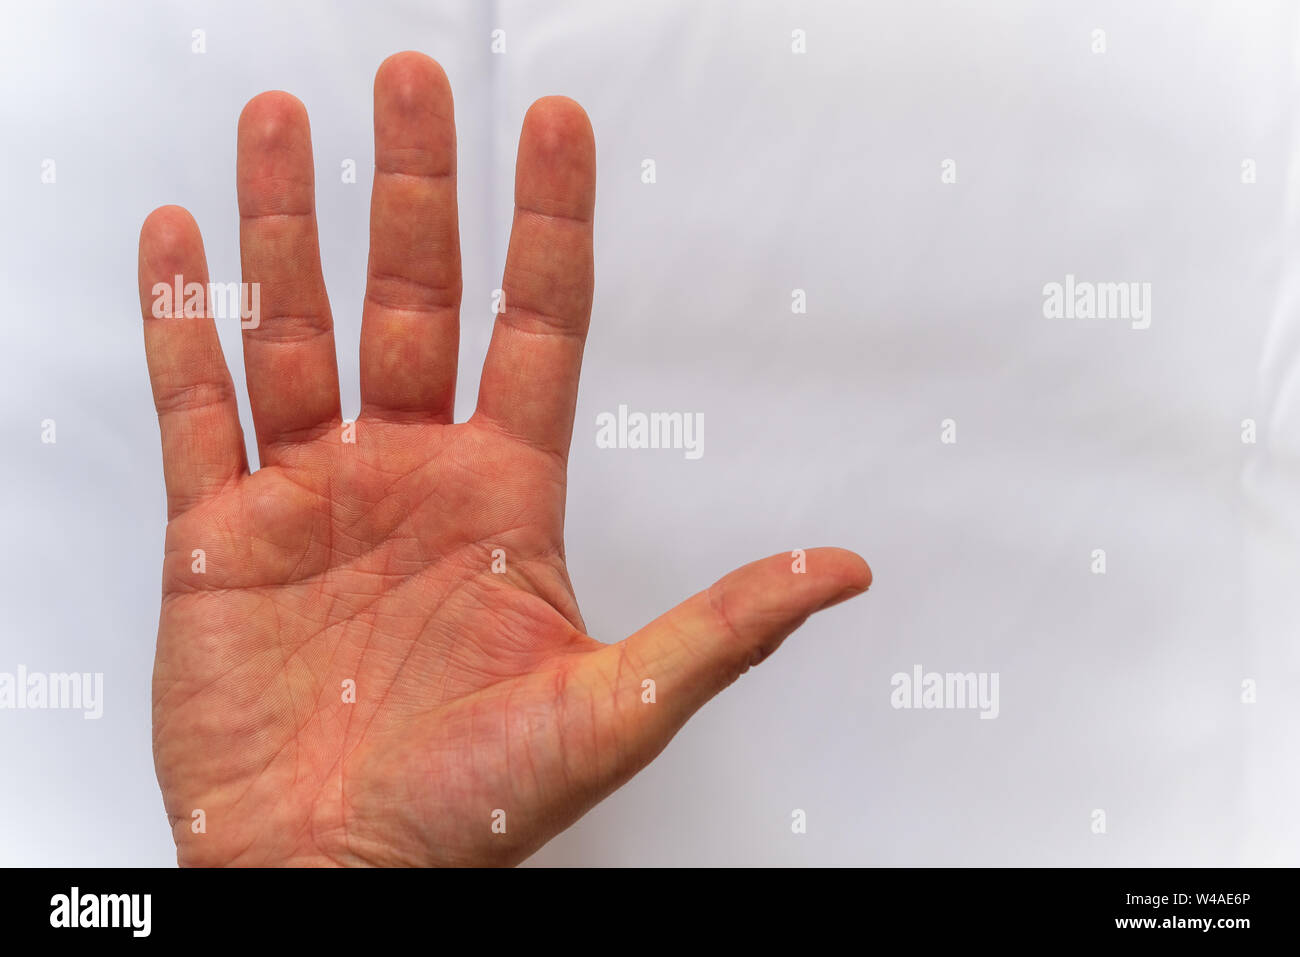 A hand shows different signs on white background Stock Photo